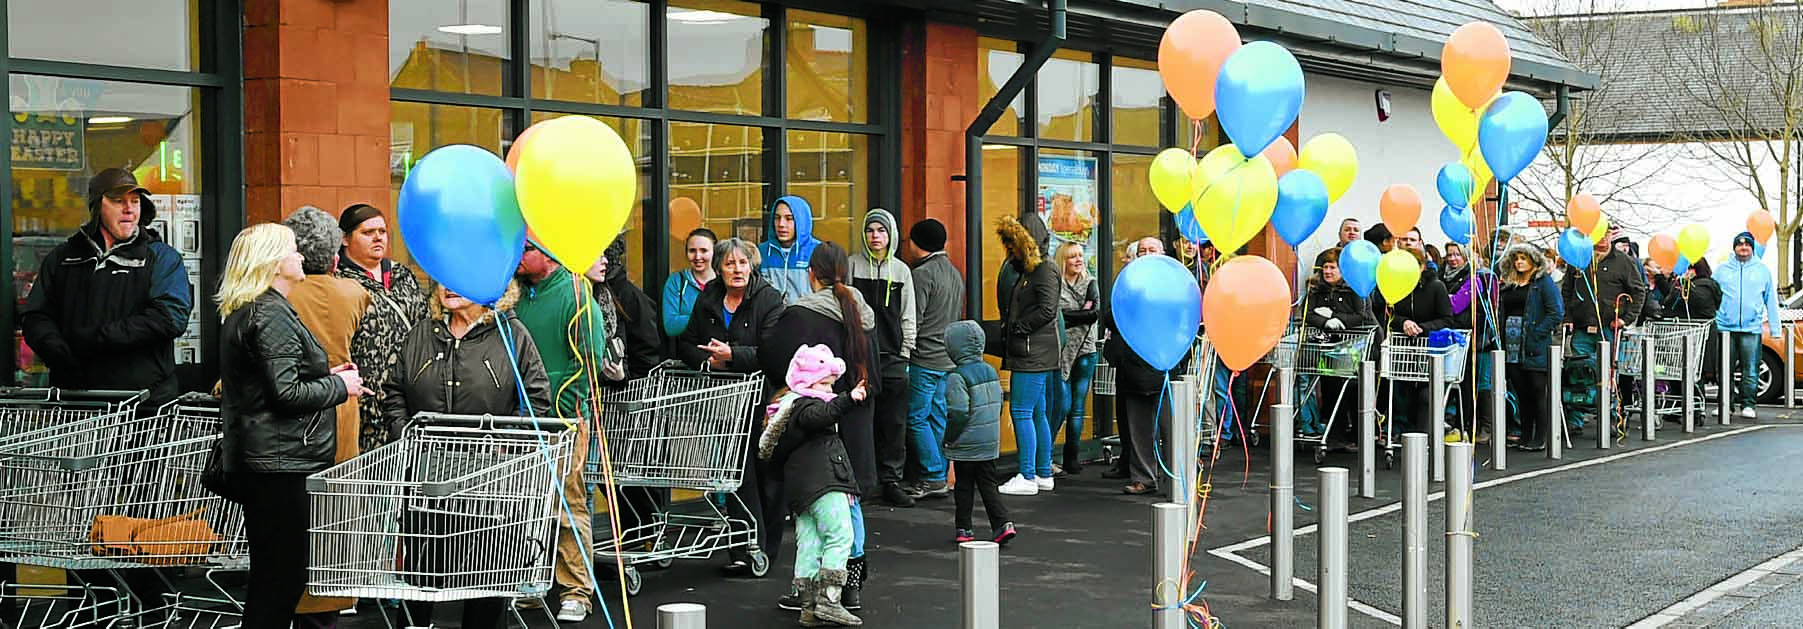 Supermarket launch draws queues for prize giveaway